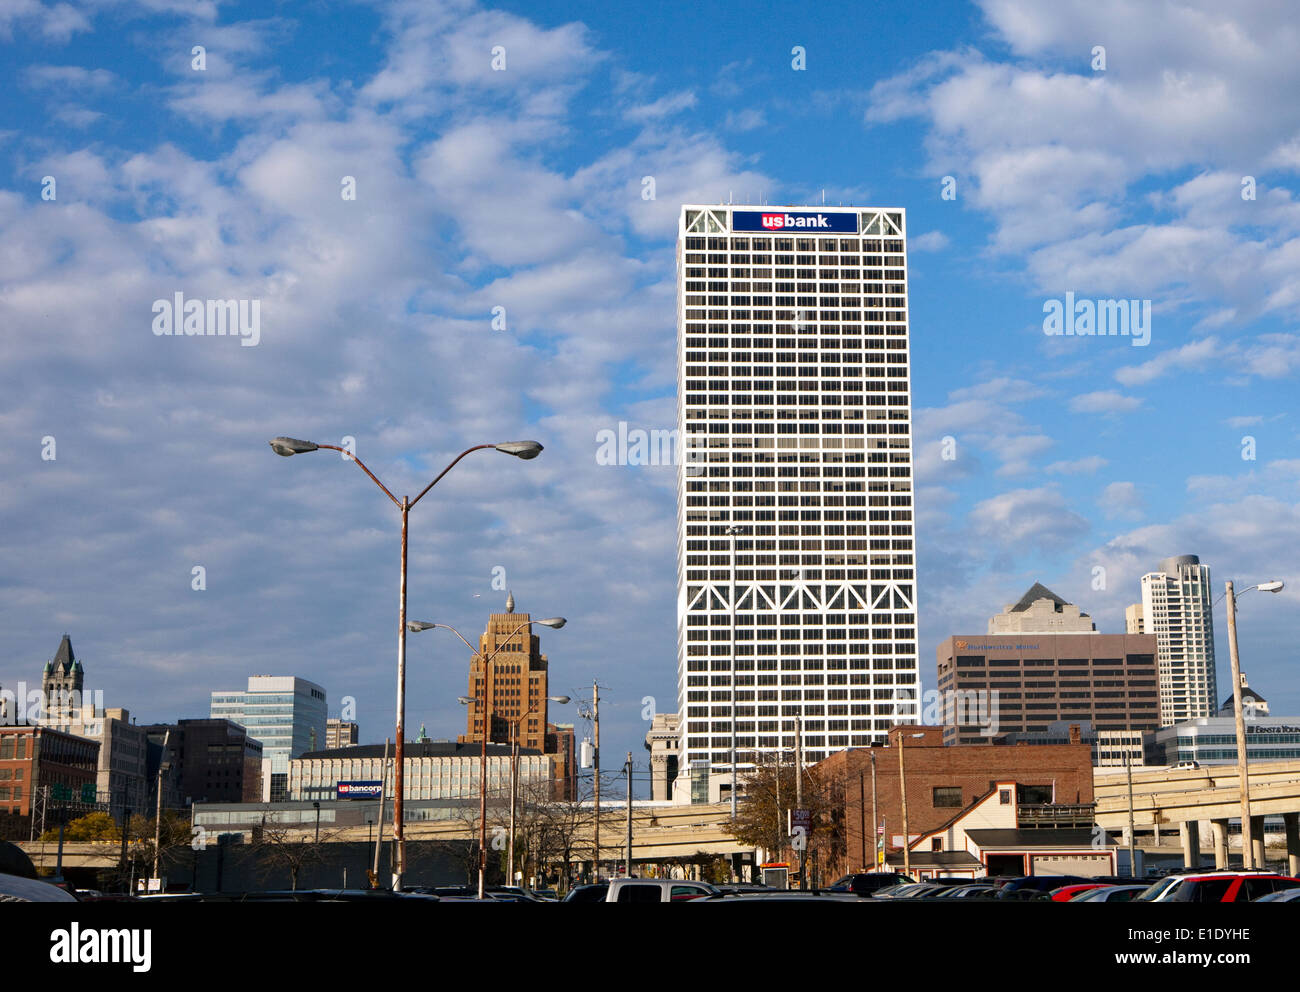 A view of the US Bank building in Milwaukee, Wisconsin Stock Photo